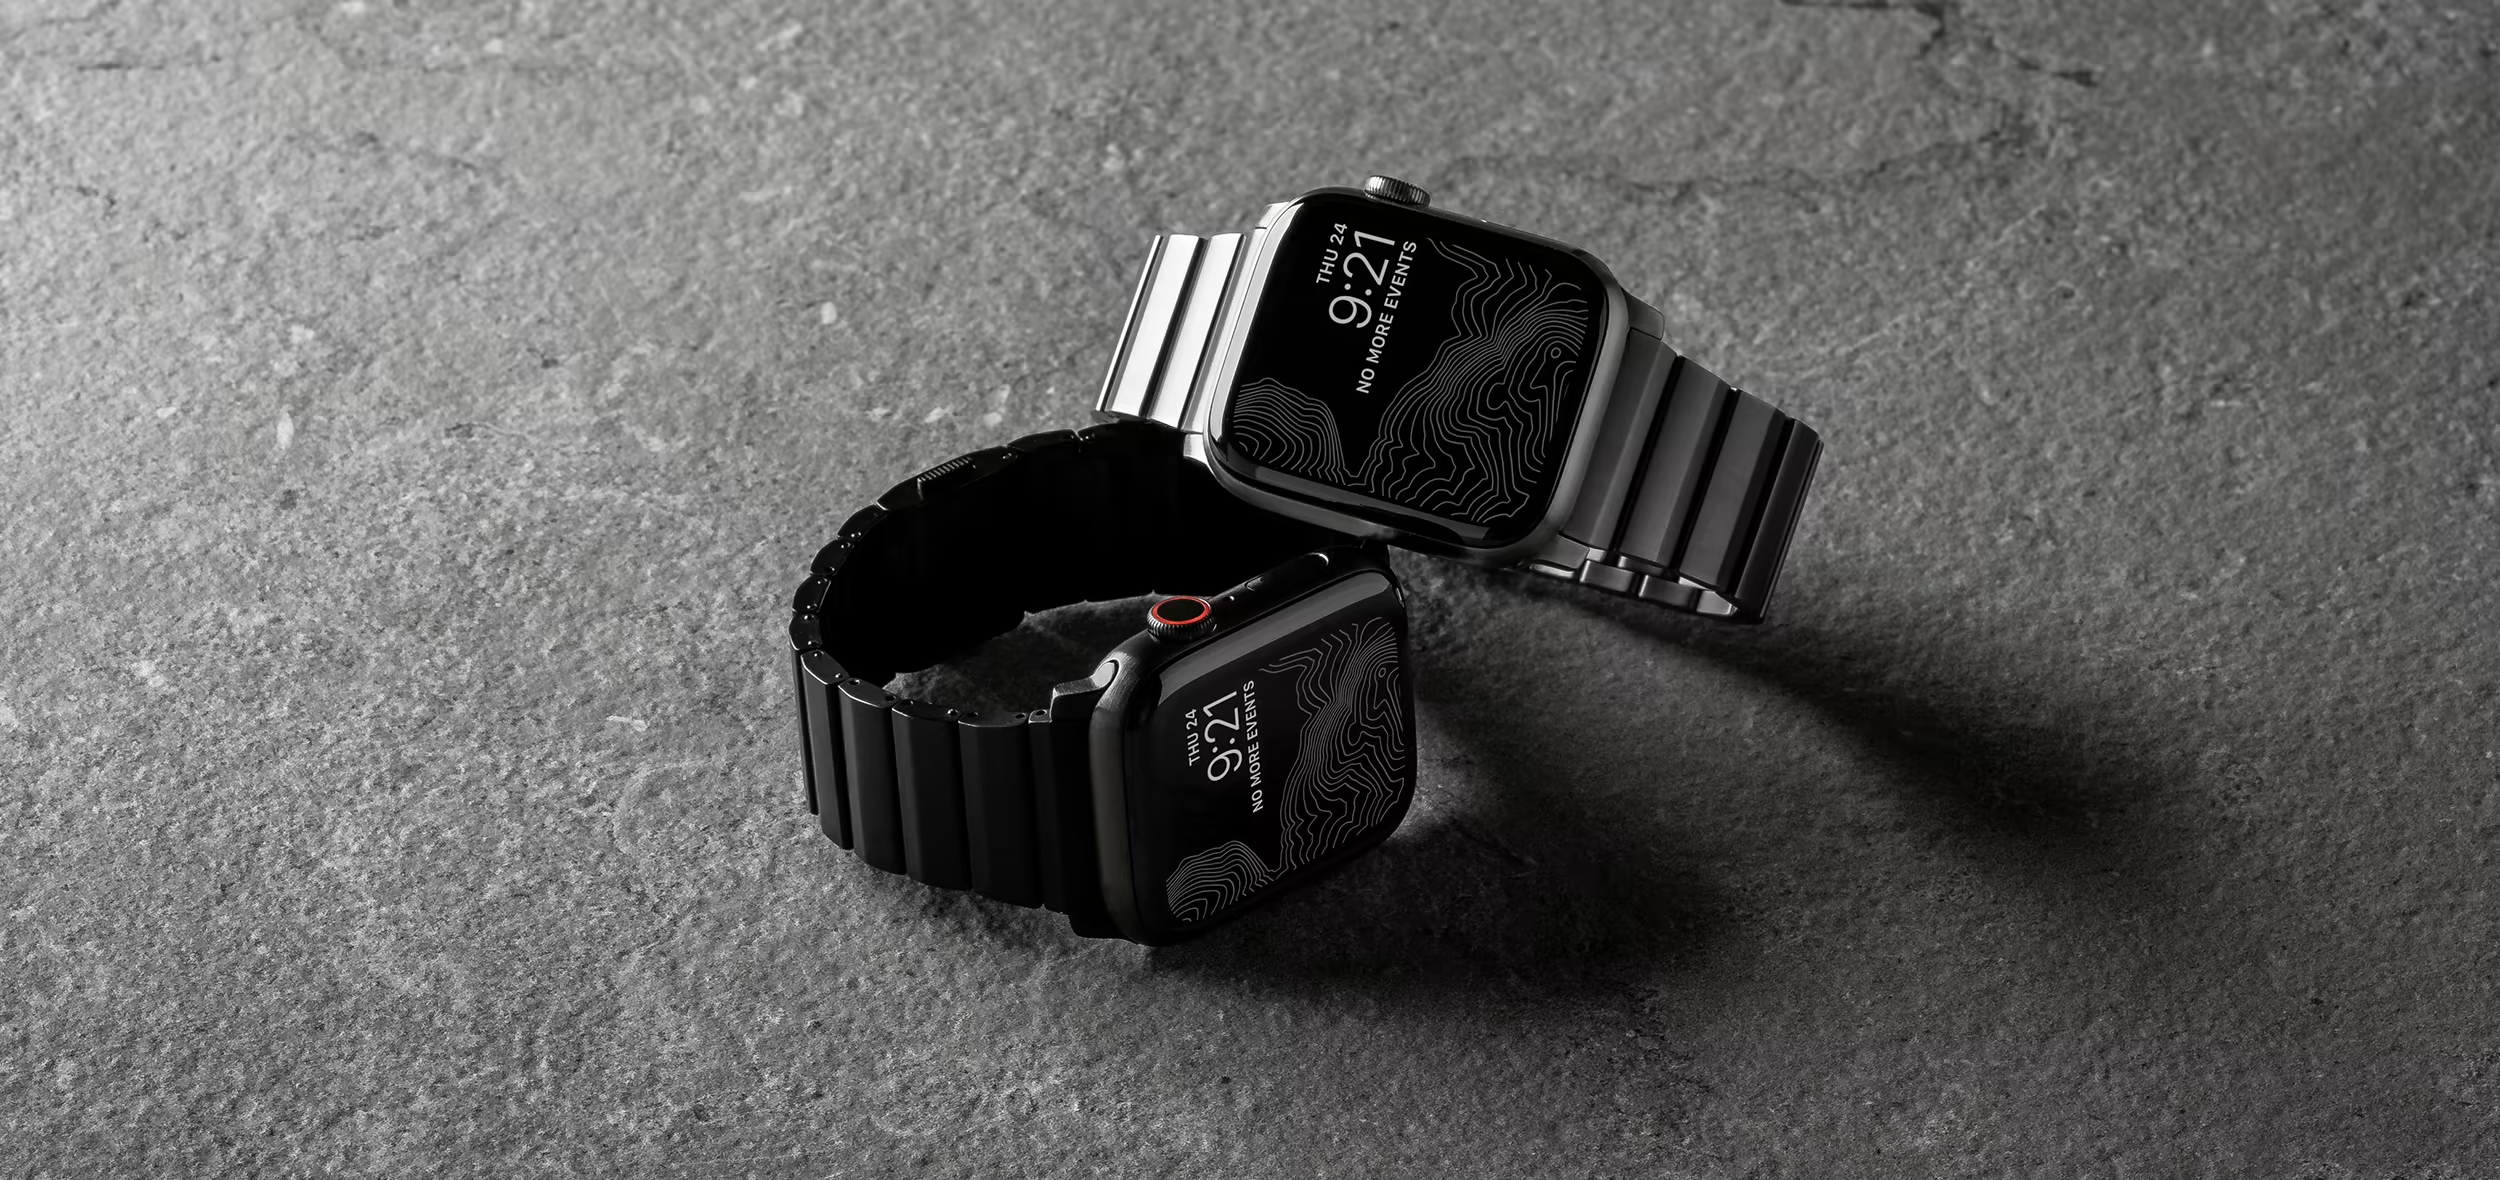 Nomad's Popular Titanium Apple Watch Band Is Finally Back in Stock